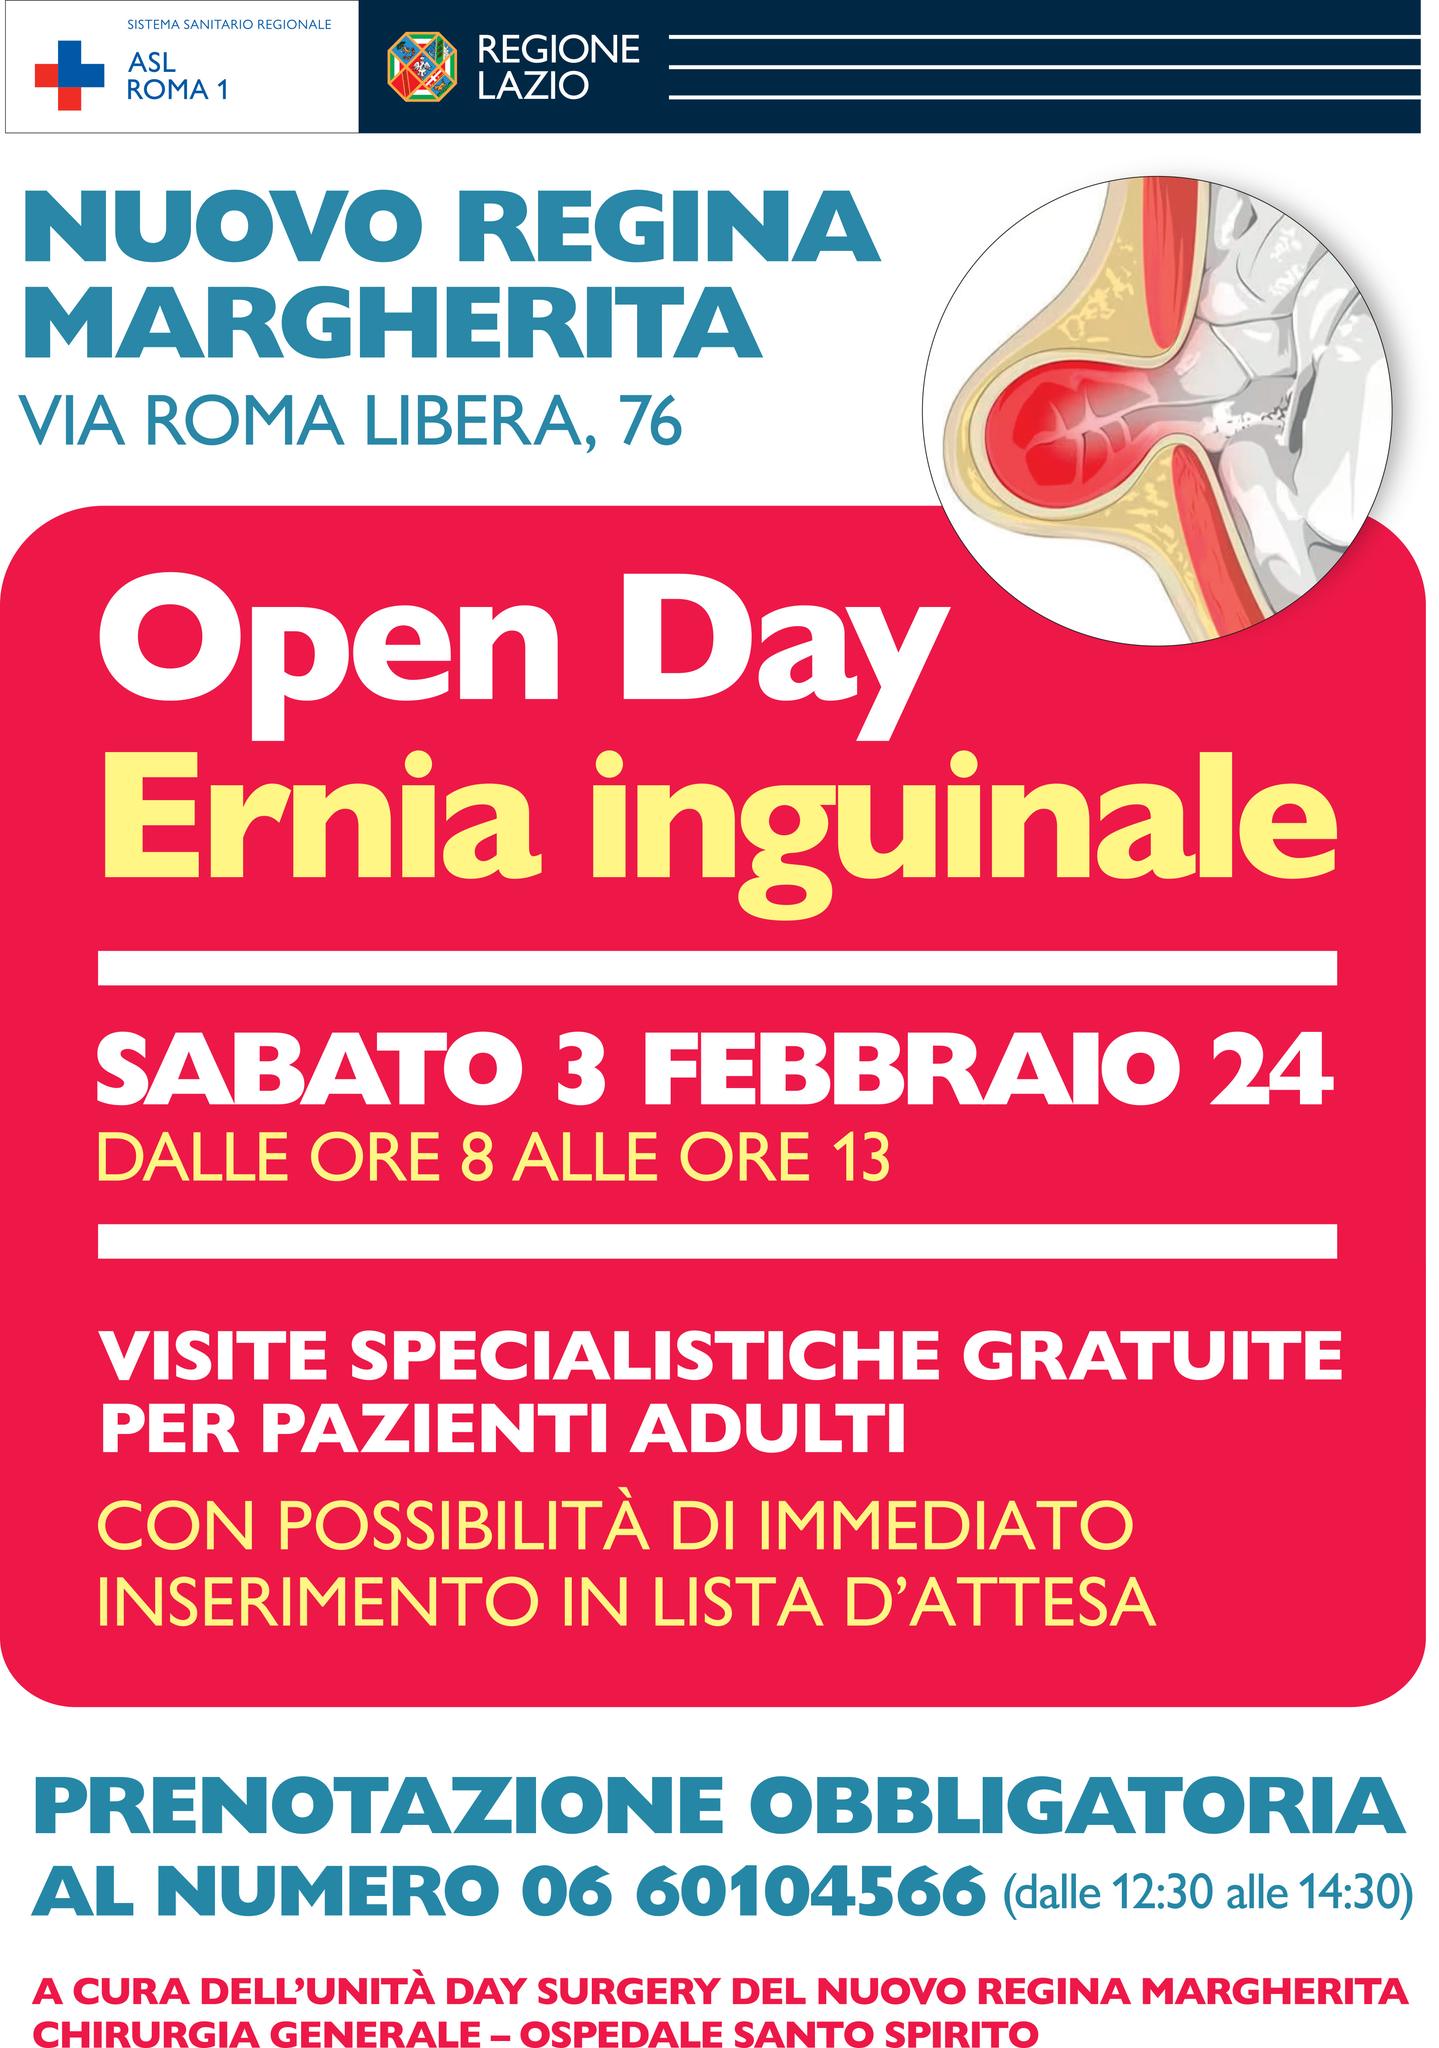 ASL Roma 1. Open Day Ernia inguinale